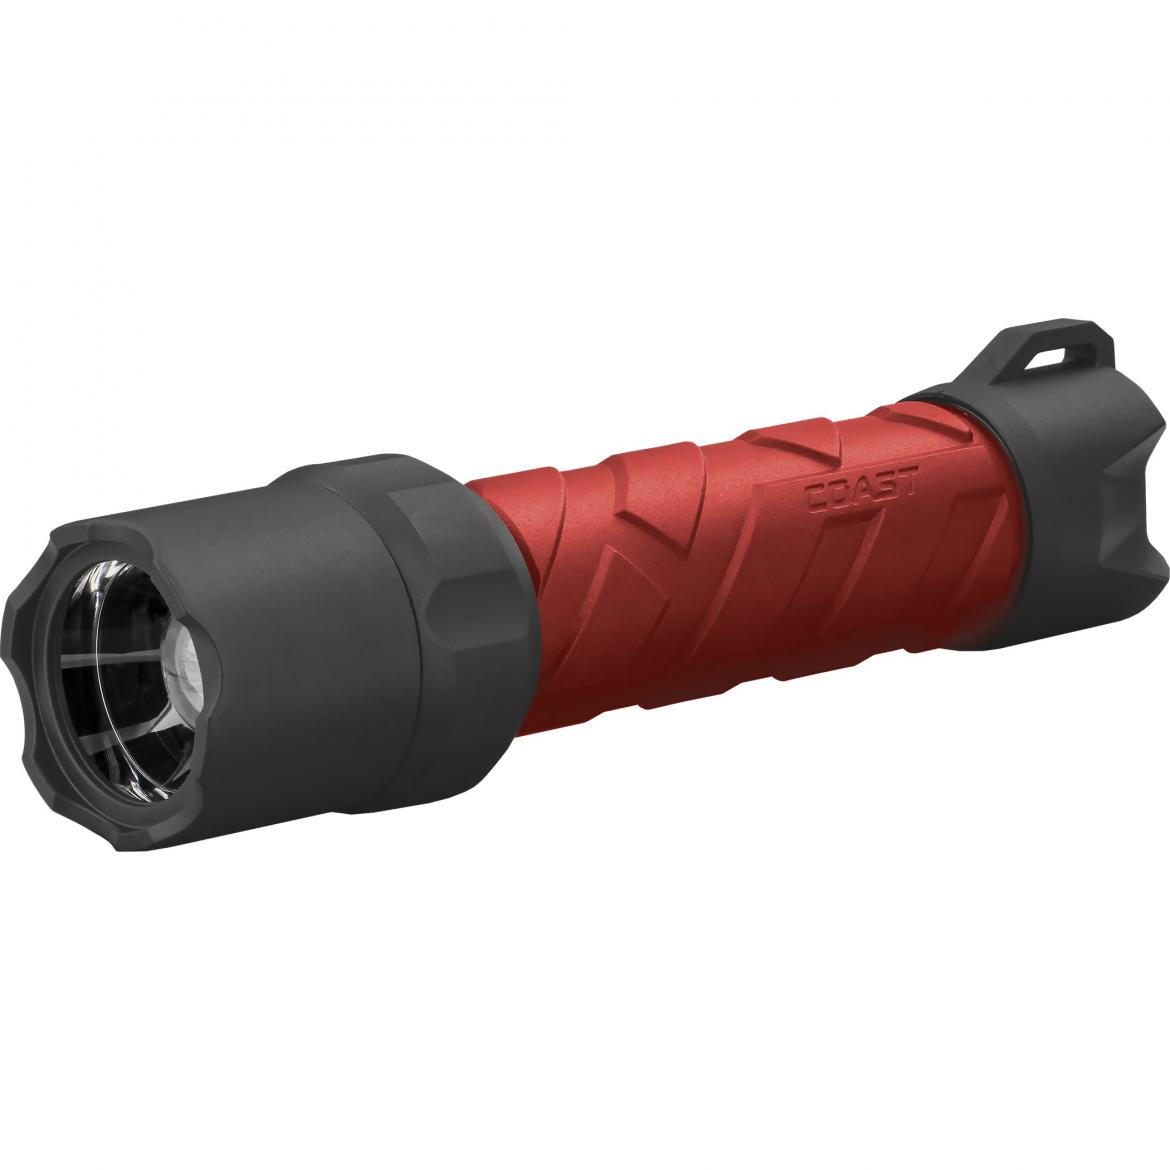 The Polysteel 600R flashlight projects a beam up to 810 feet. Featuring a Pure Beam Optics System that produces a pure, bright, consistent beam, the product uses a lithium rechargeable battery pack or standard alkaline batteries. It’s available in various colors and is waterproof, crush proof, and drop proof, the maker says.